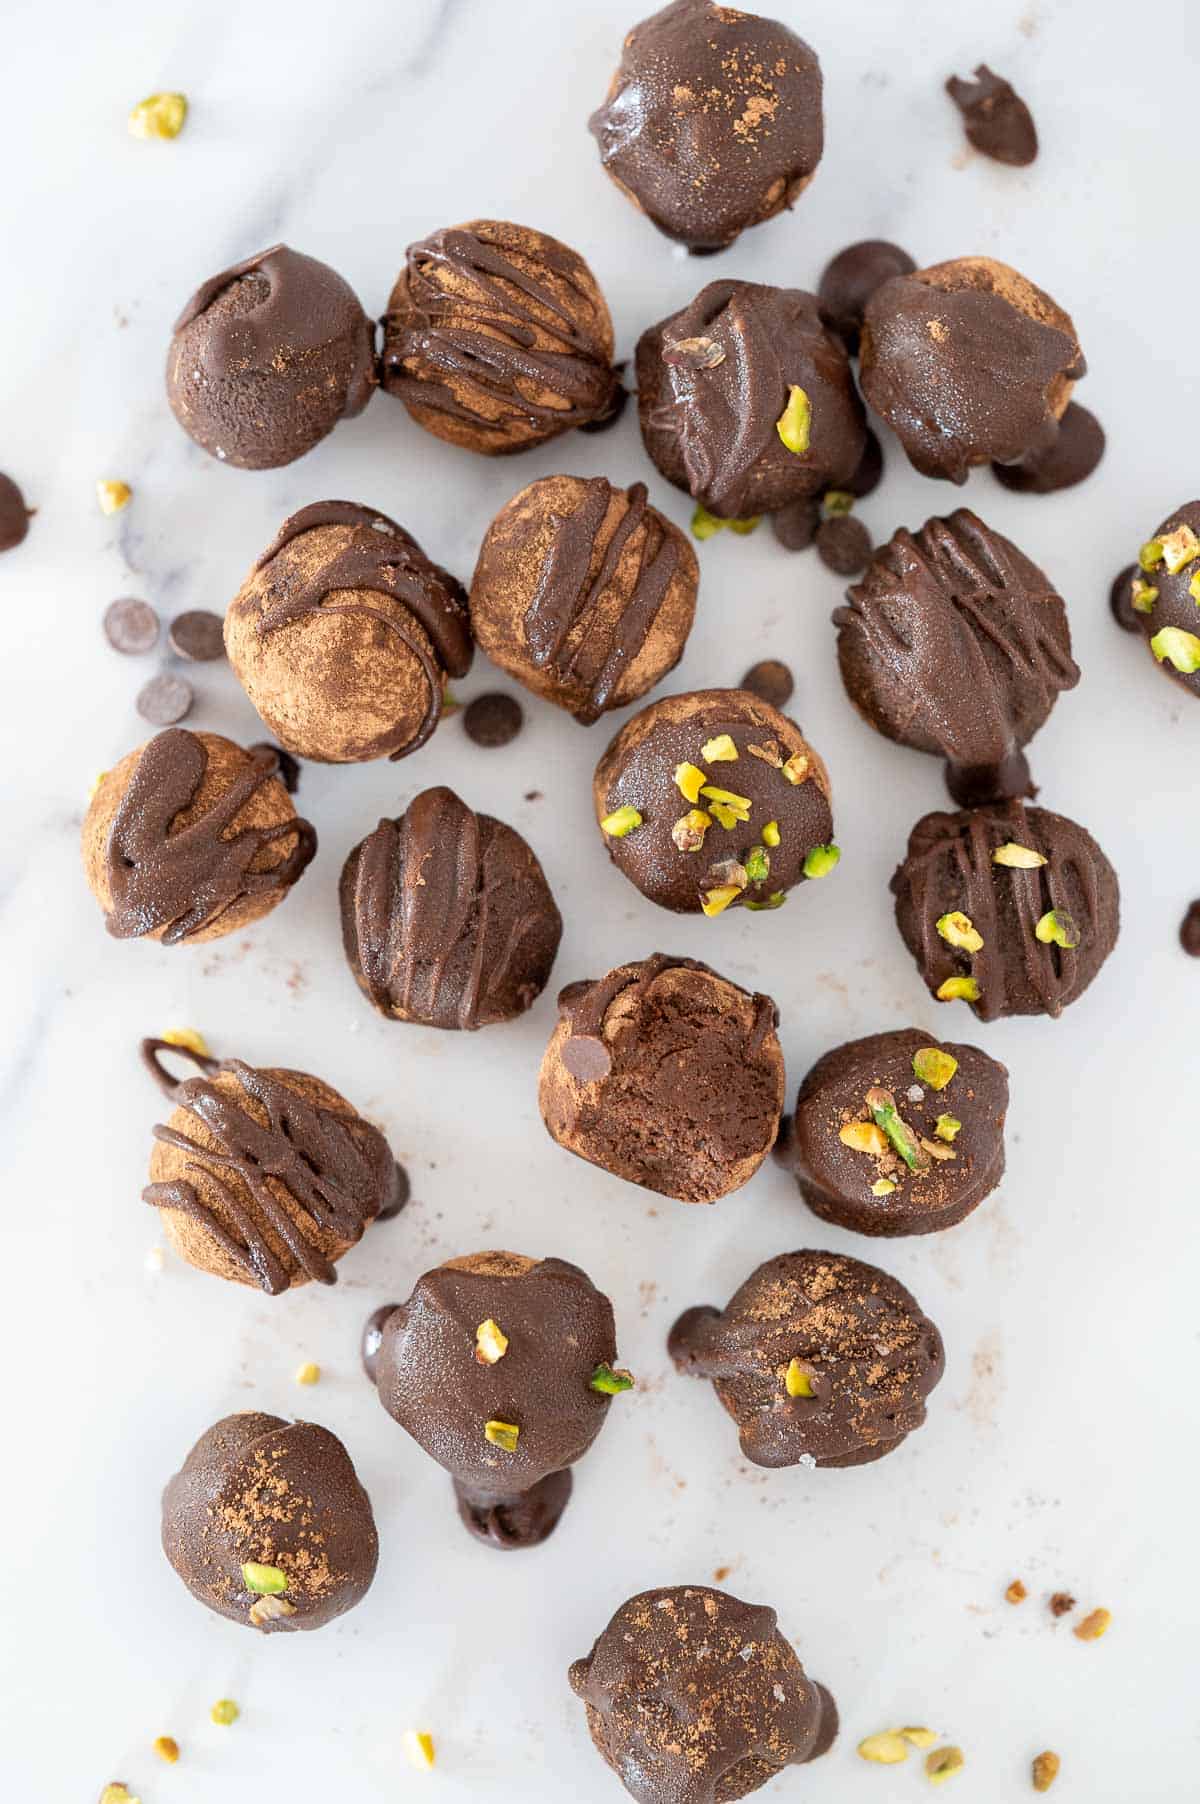 lots of chocolate avocado truffles scattered on a benchtop